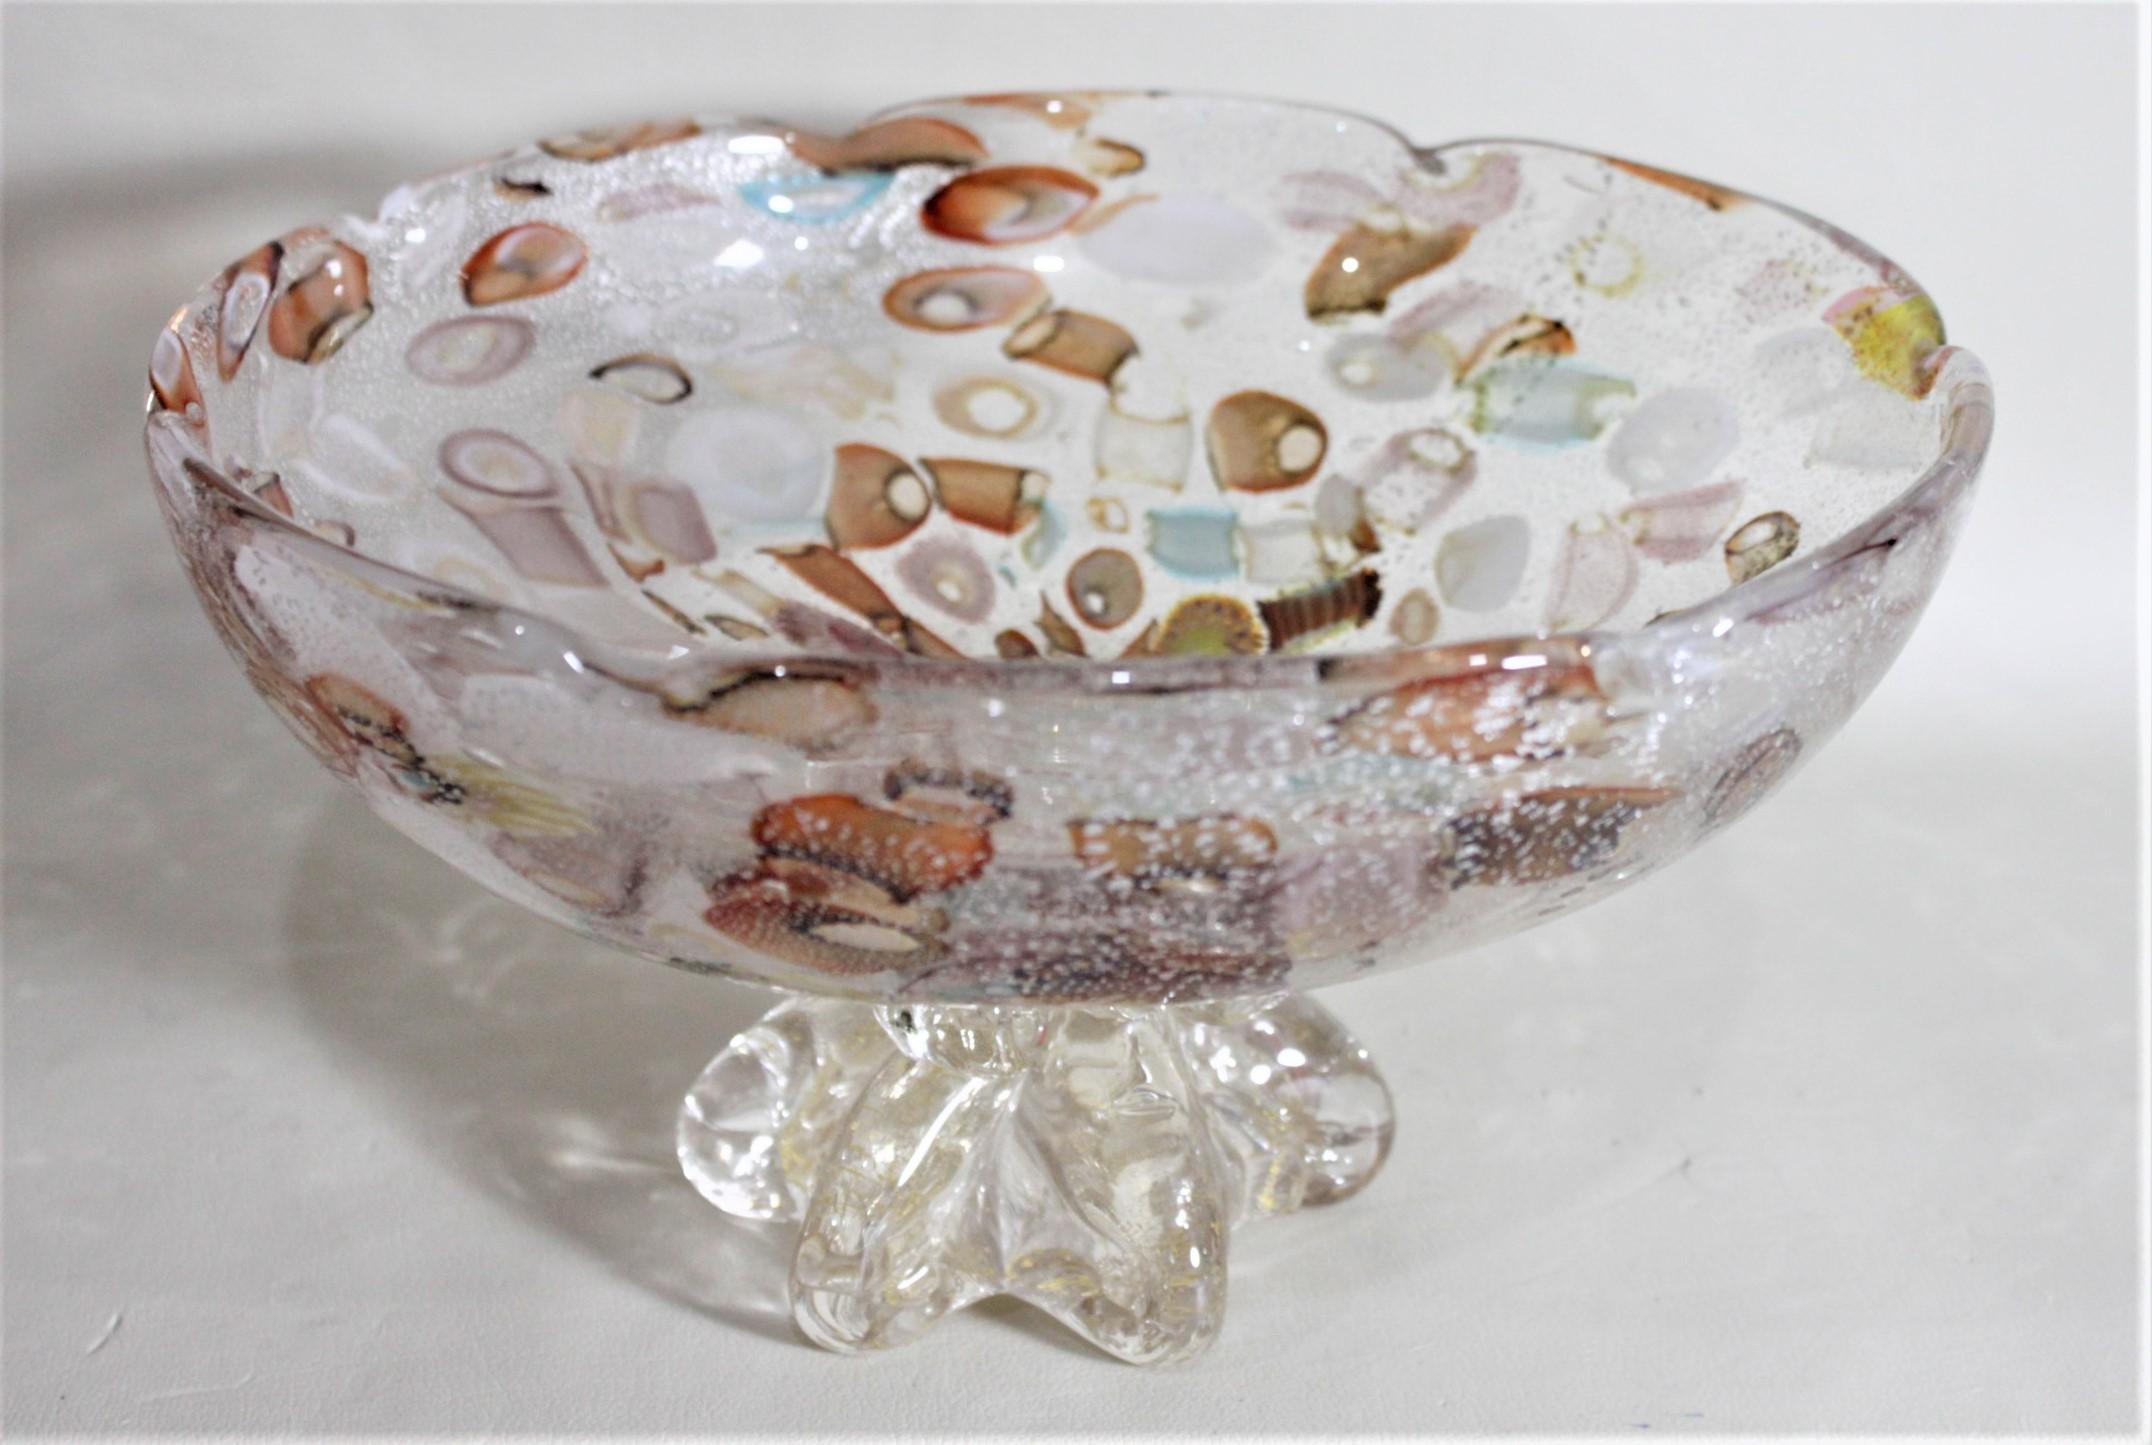 This large Mid-Century Modern art glass footed compote is unsigned but presumed to have been made in Italy in circa 1969. The bowl is done in multicolored swirls of red, brown, blue, white, yellow and orange on a clear background with silver flecked